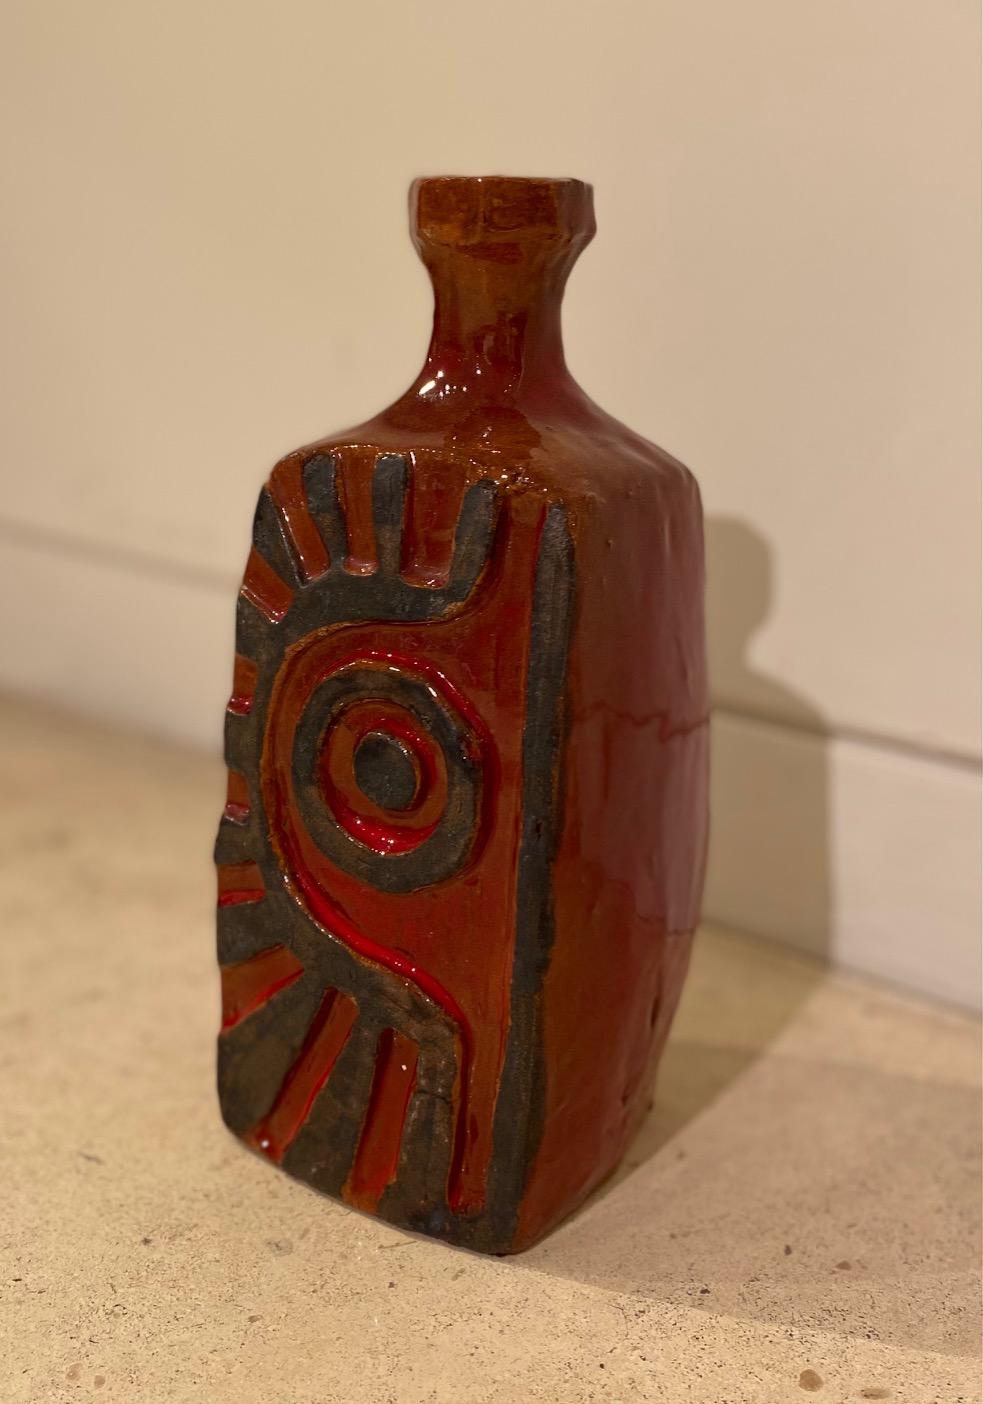 Red Ceramic glazed vase by Charles Sucsan

Charles Sucsan was born in Paris, France to Hungarian parents. The artist studied ceramics and sculpture in Paris, apprenticing at the studio of Florencio Fernandez, a master ceramist and close friend to